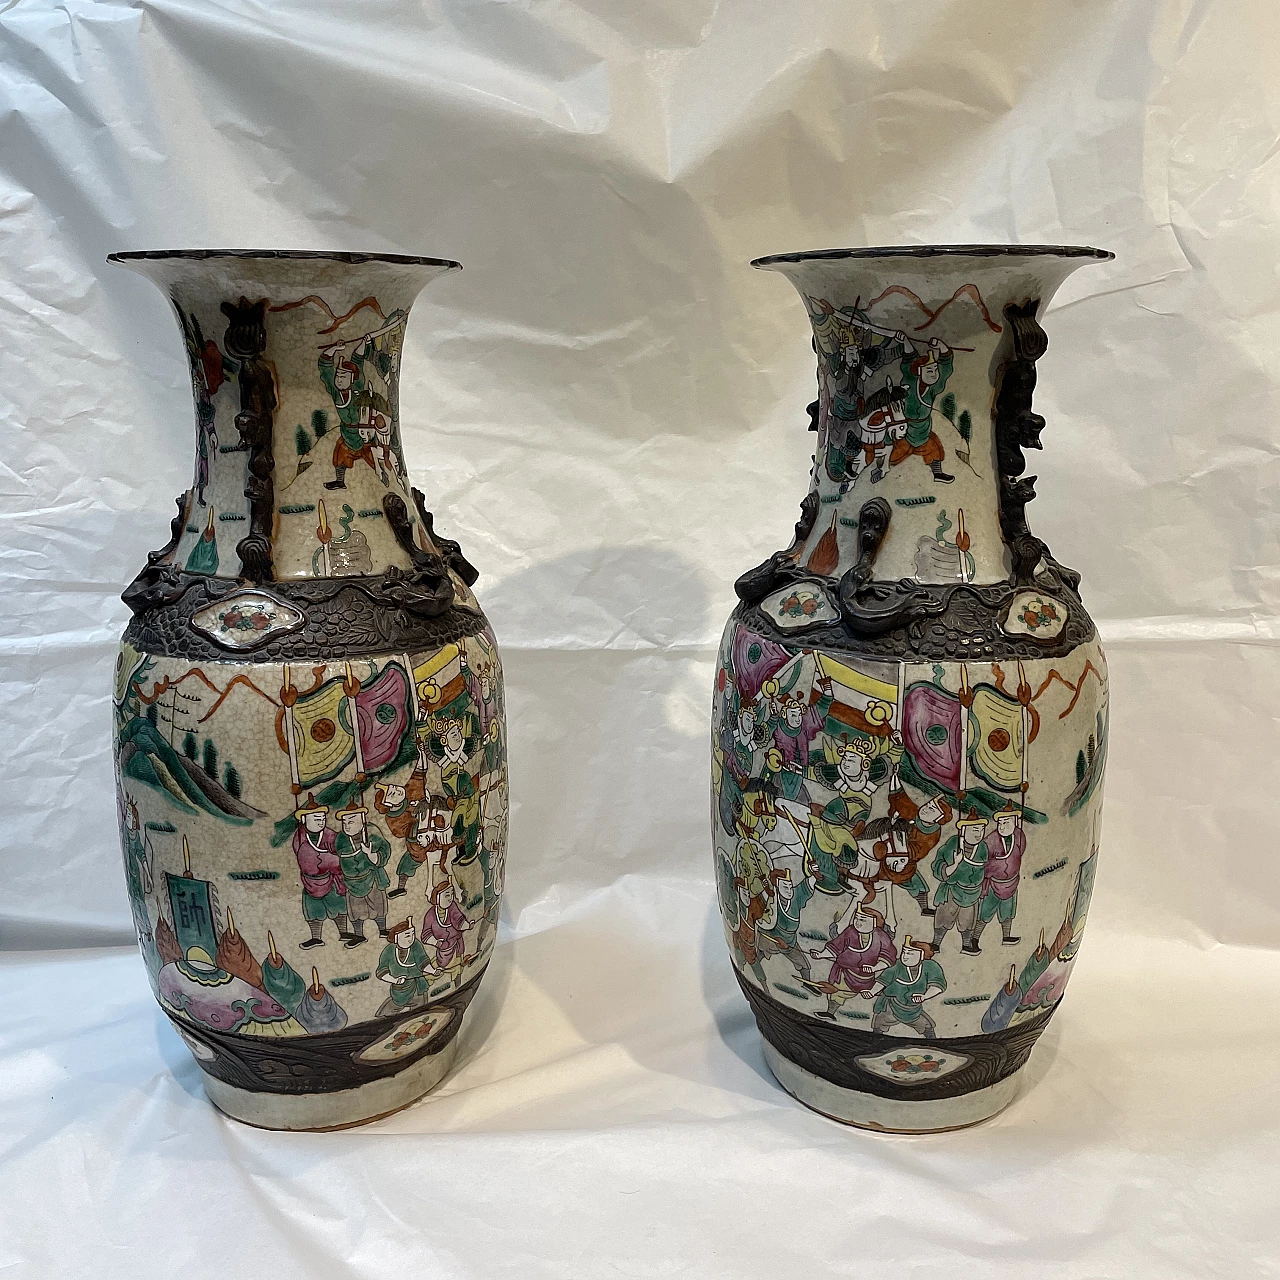 Pair of Chinese ceramic vases with war scenes and wooden details, 1920s 1